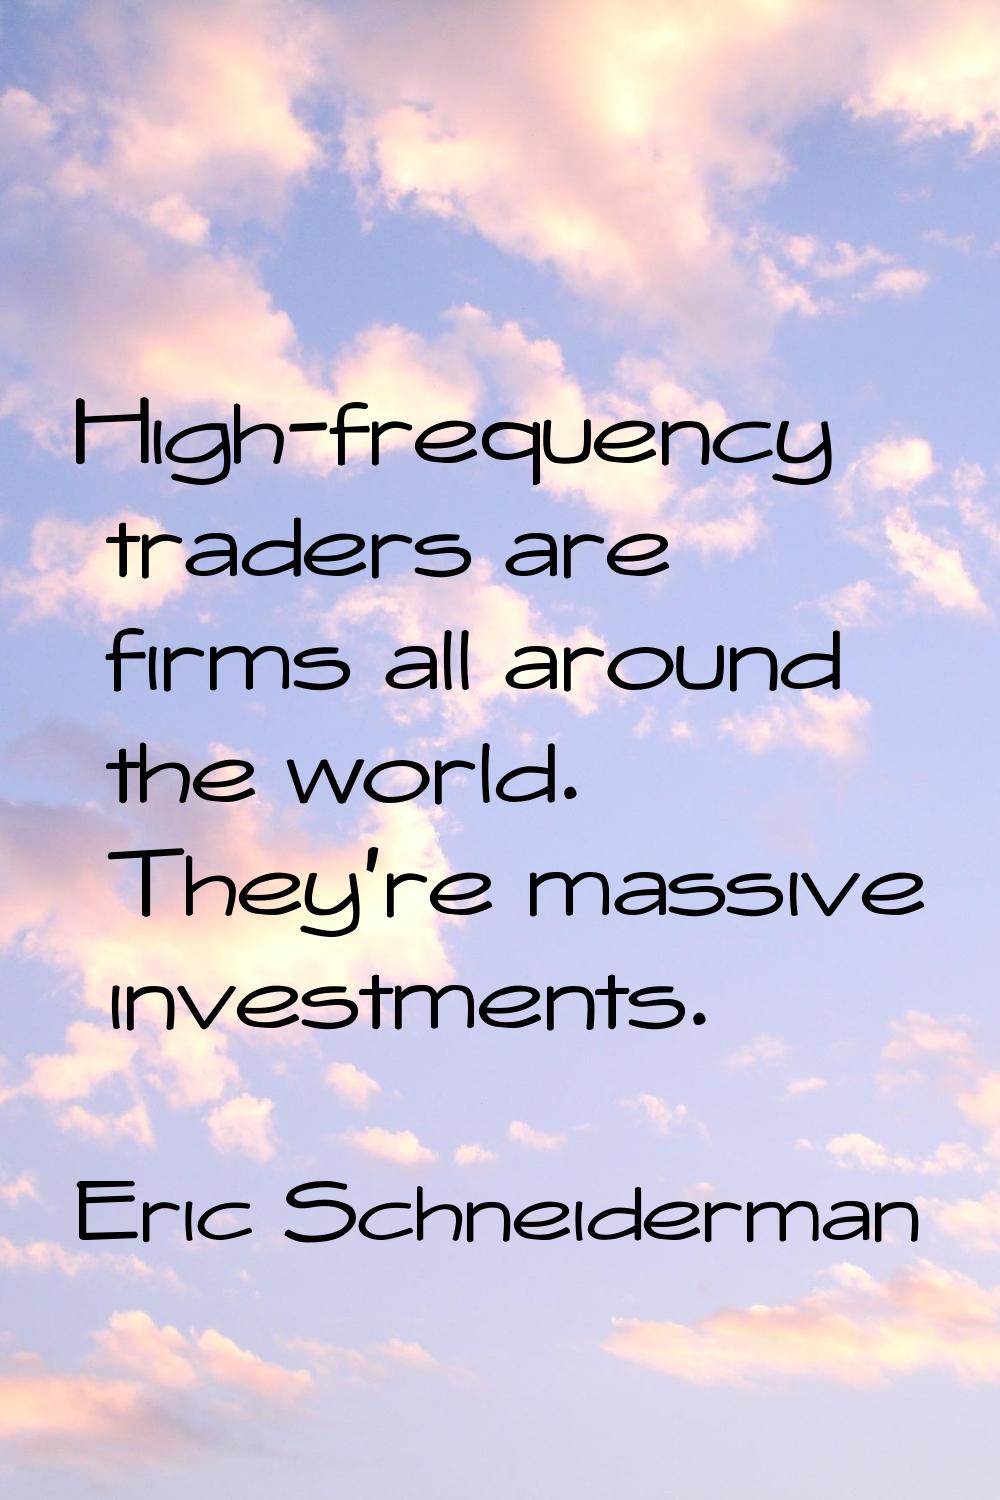 High-frequency traders are firms all around the world. They're massive investments.